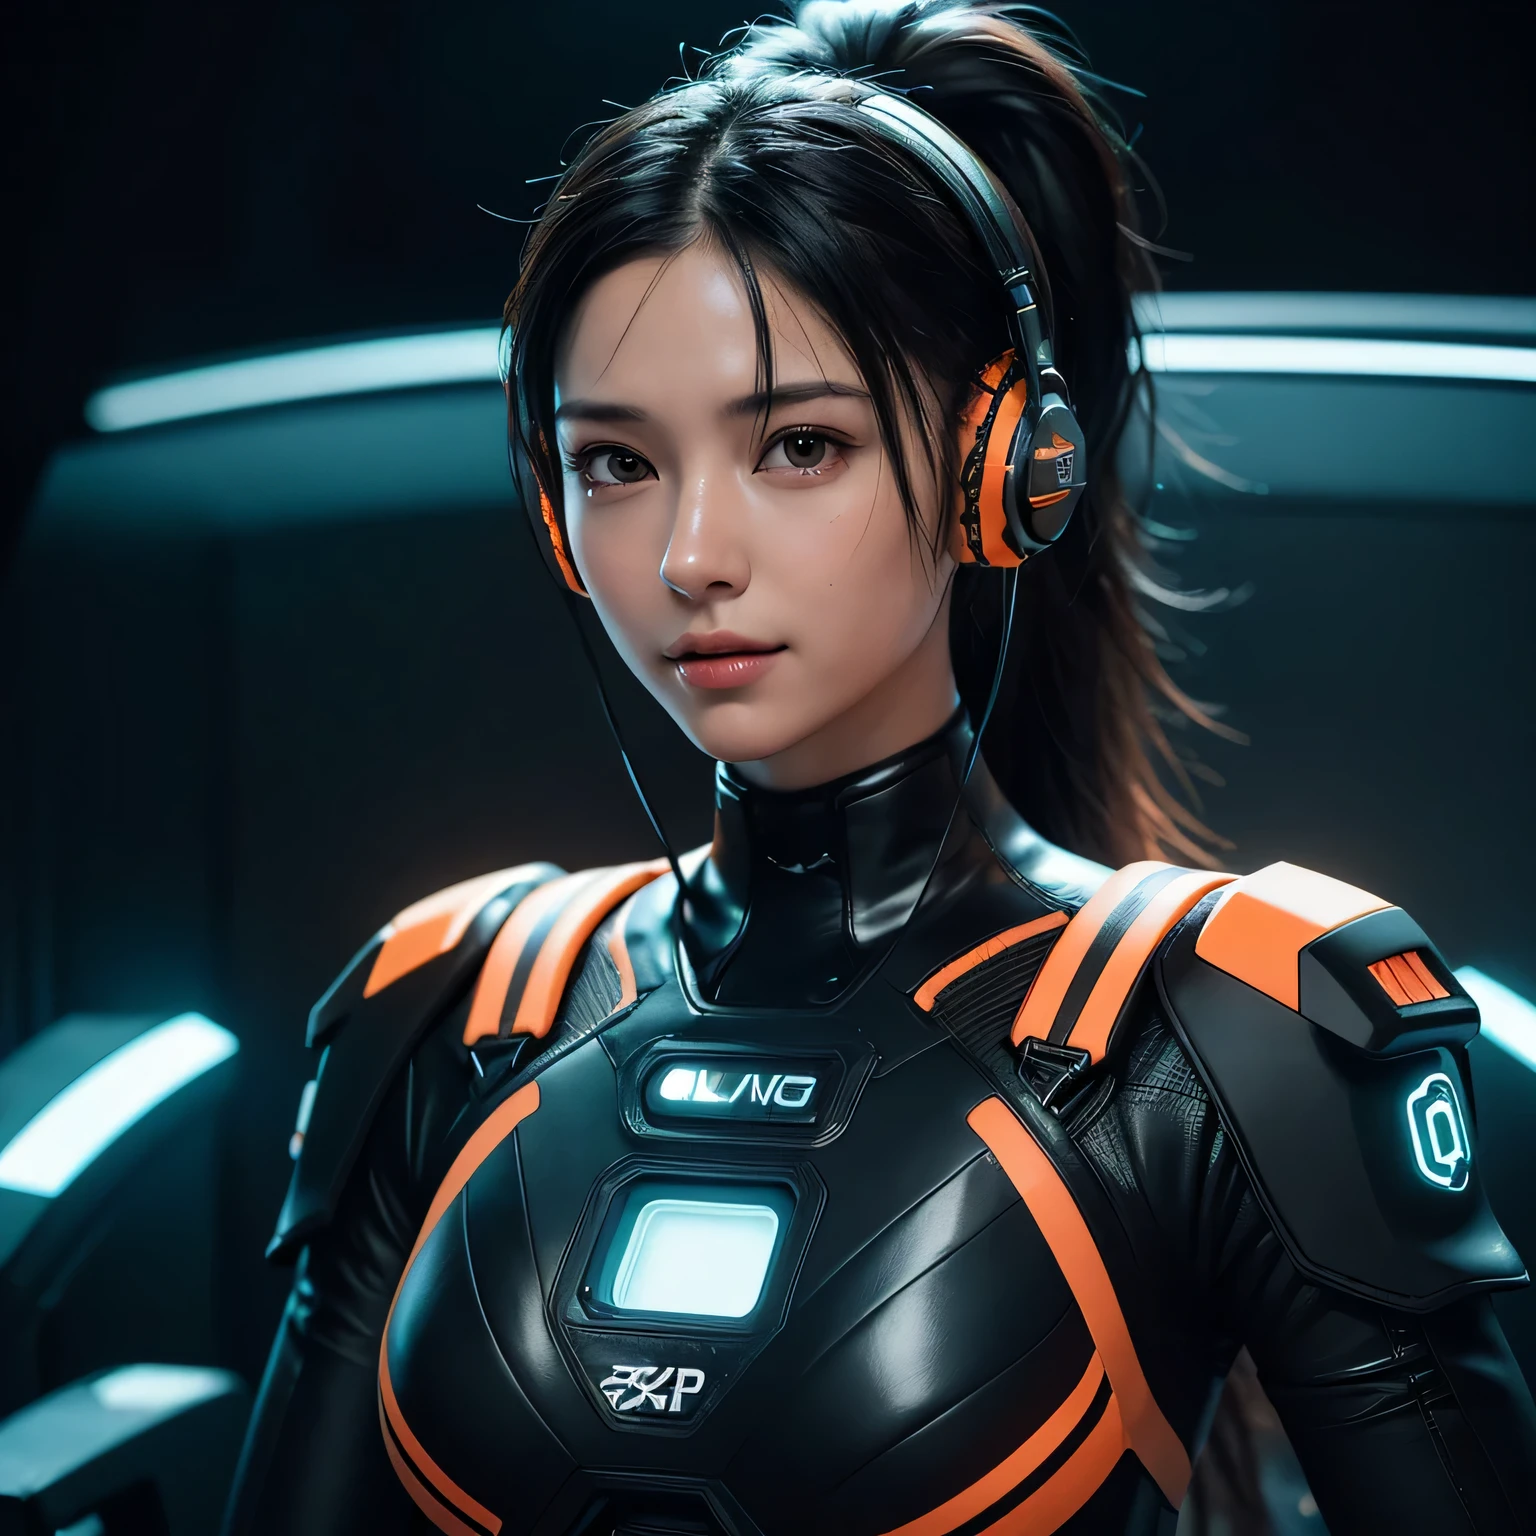 ((Best quality)), ((masterpiece)), (detailed:1.4), 3D, an image of a beautiful cyberpunk female,HDR (High Dynamic Range),Ray Tracing,NVIDIA RTX,Super-Resolution,Unreal 5,Subsurface scattering,PBR Texturing,Post-processing,Anisotropic Filtering,Depth-of-field,Maximum clarity and sharpness,Multi-layered textures,Albedo and Specular maps,Surface shading,Accurate simulation of light-material interaction,Perfect proportions,Octane Render,Two-tone lighting,Wide aperture,Low ISO,White balance,Rule of thirds,8K RAW,Beautiful,beautiful woman, skinny thick bodysuit,Girl with armor suit, 22 years old asian beautiful girl with((black long hair)), black and ((neon orange glow lining)) -  spacesuit, (((futuristic black orange headphone))), 1girl, serious smile, beautiful brown eyes, ponytail long hair, realistic,  black bodysuit,
,3d animation, boombastic side eyes, ((spaceship command center background)), ,half body Shot